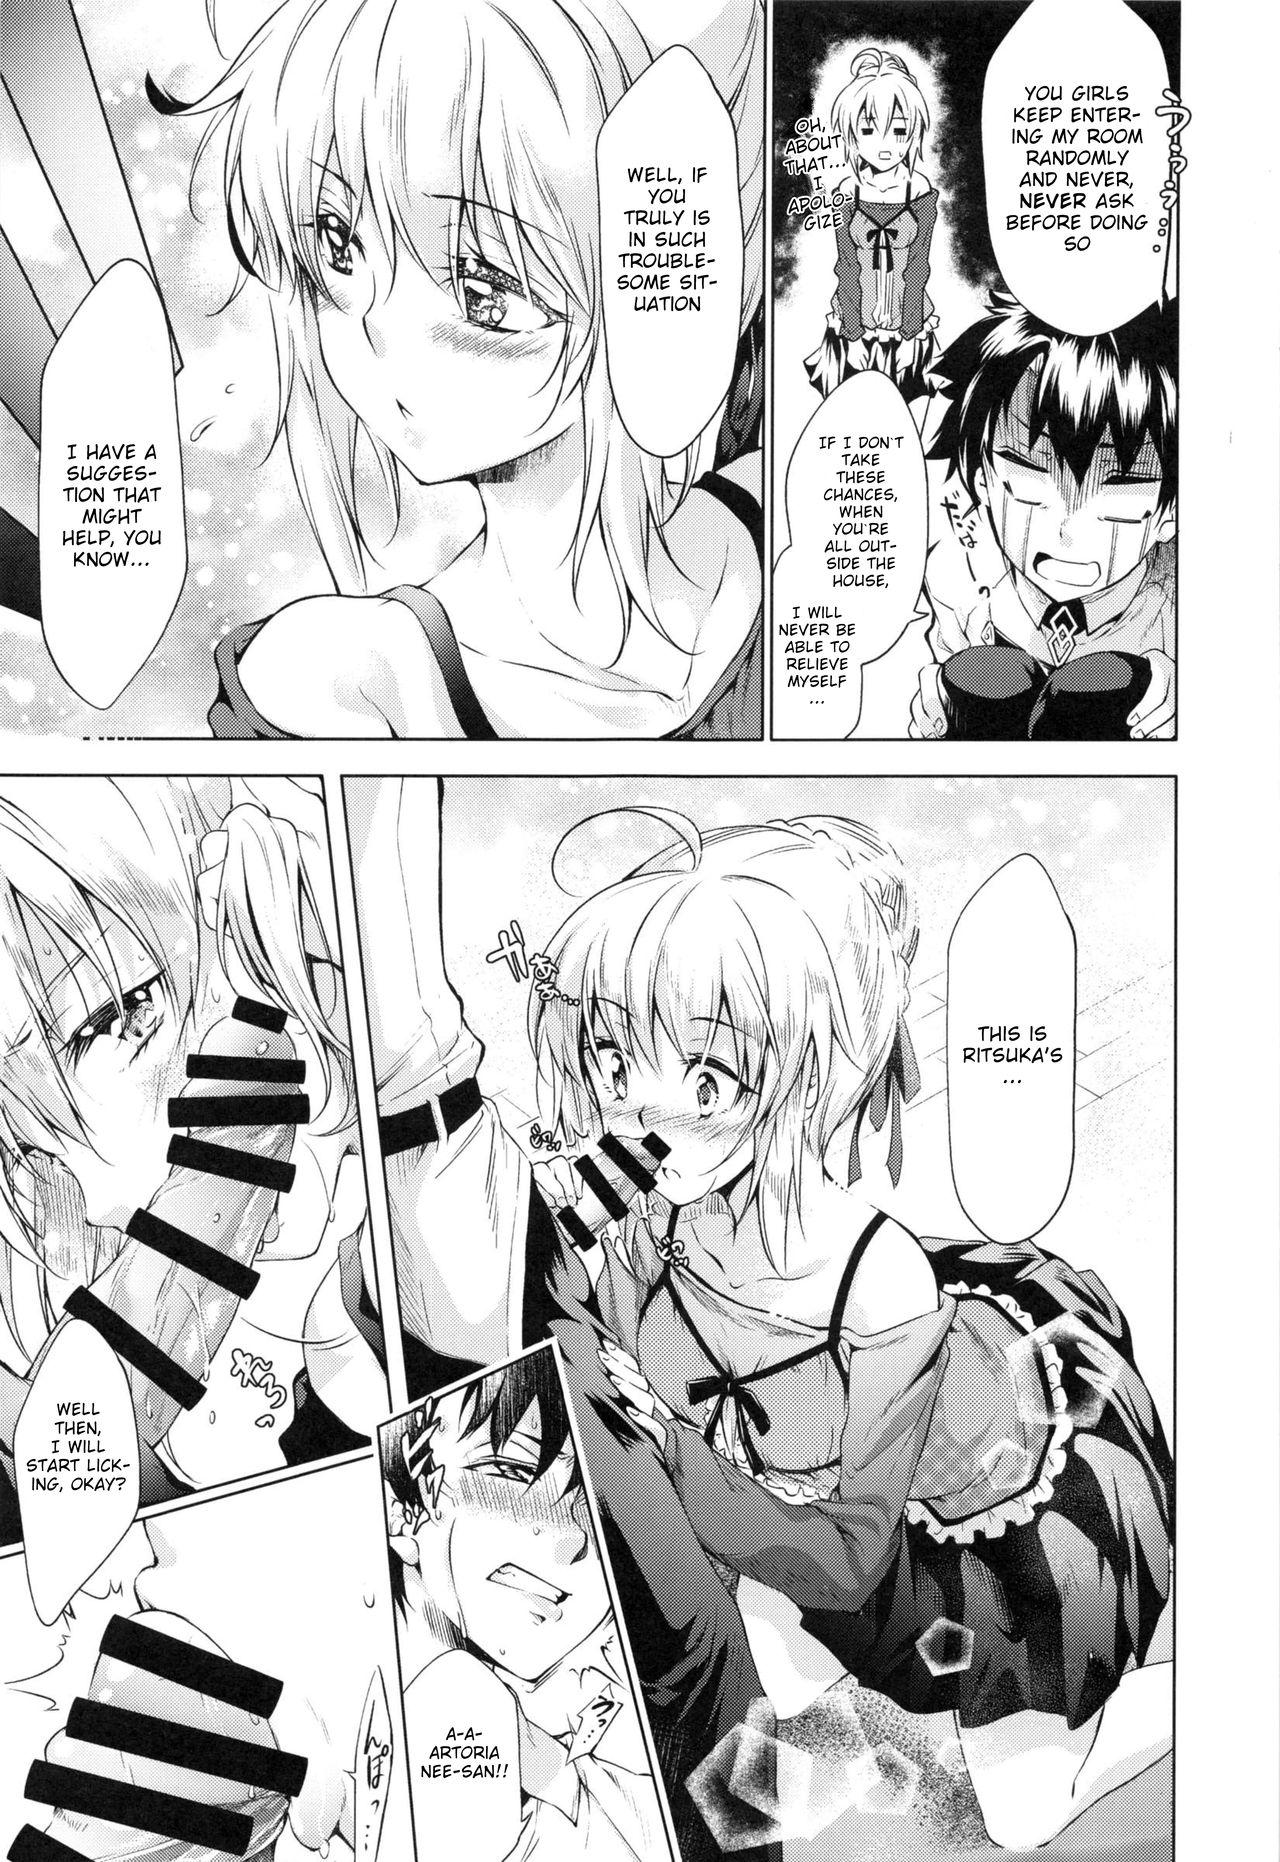 Sesso Pendra-ke no Seijijou | The sexual situation of the Pendragon house - Fate grand order Men - Page 10